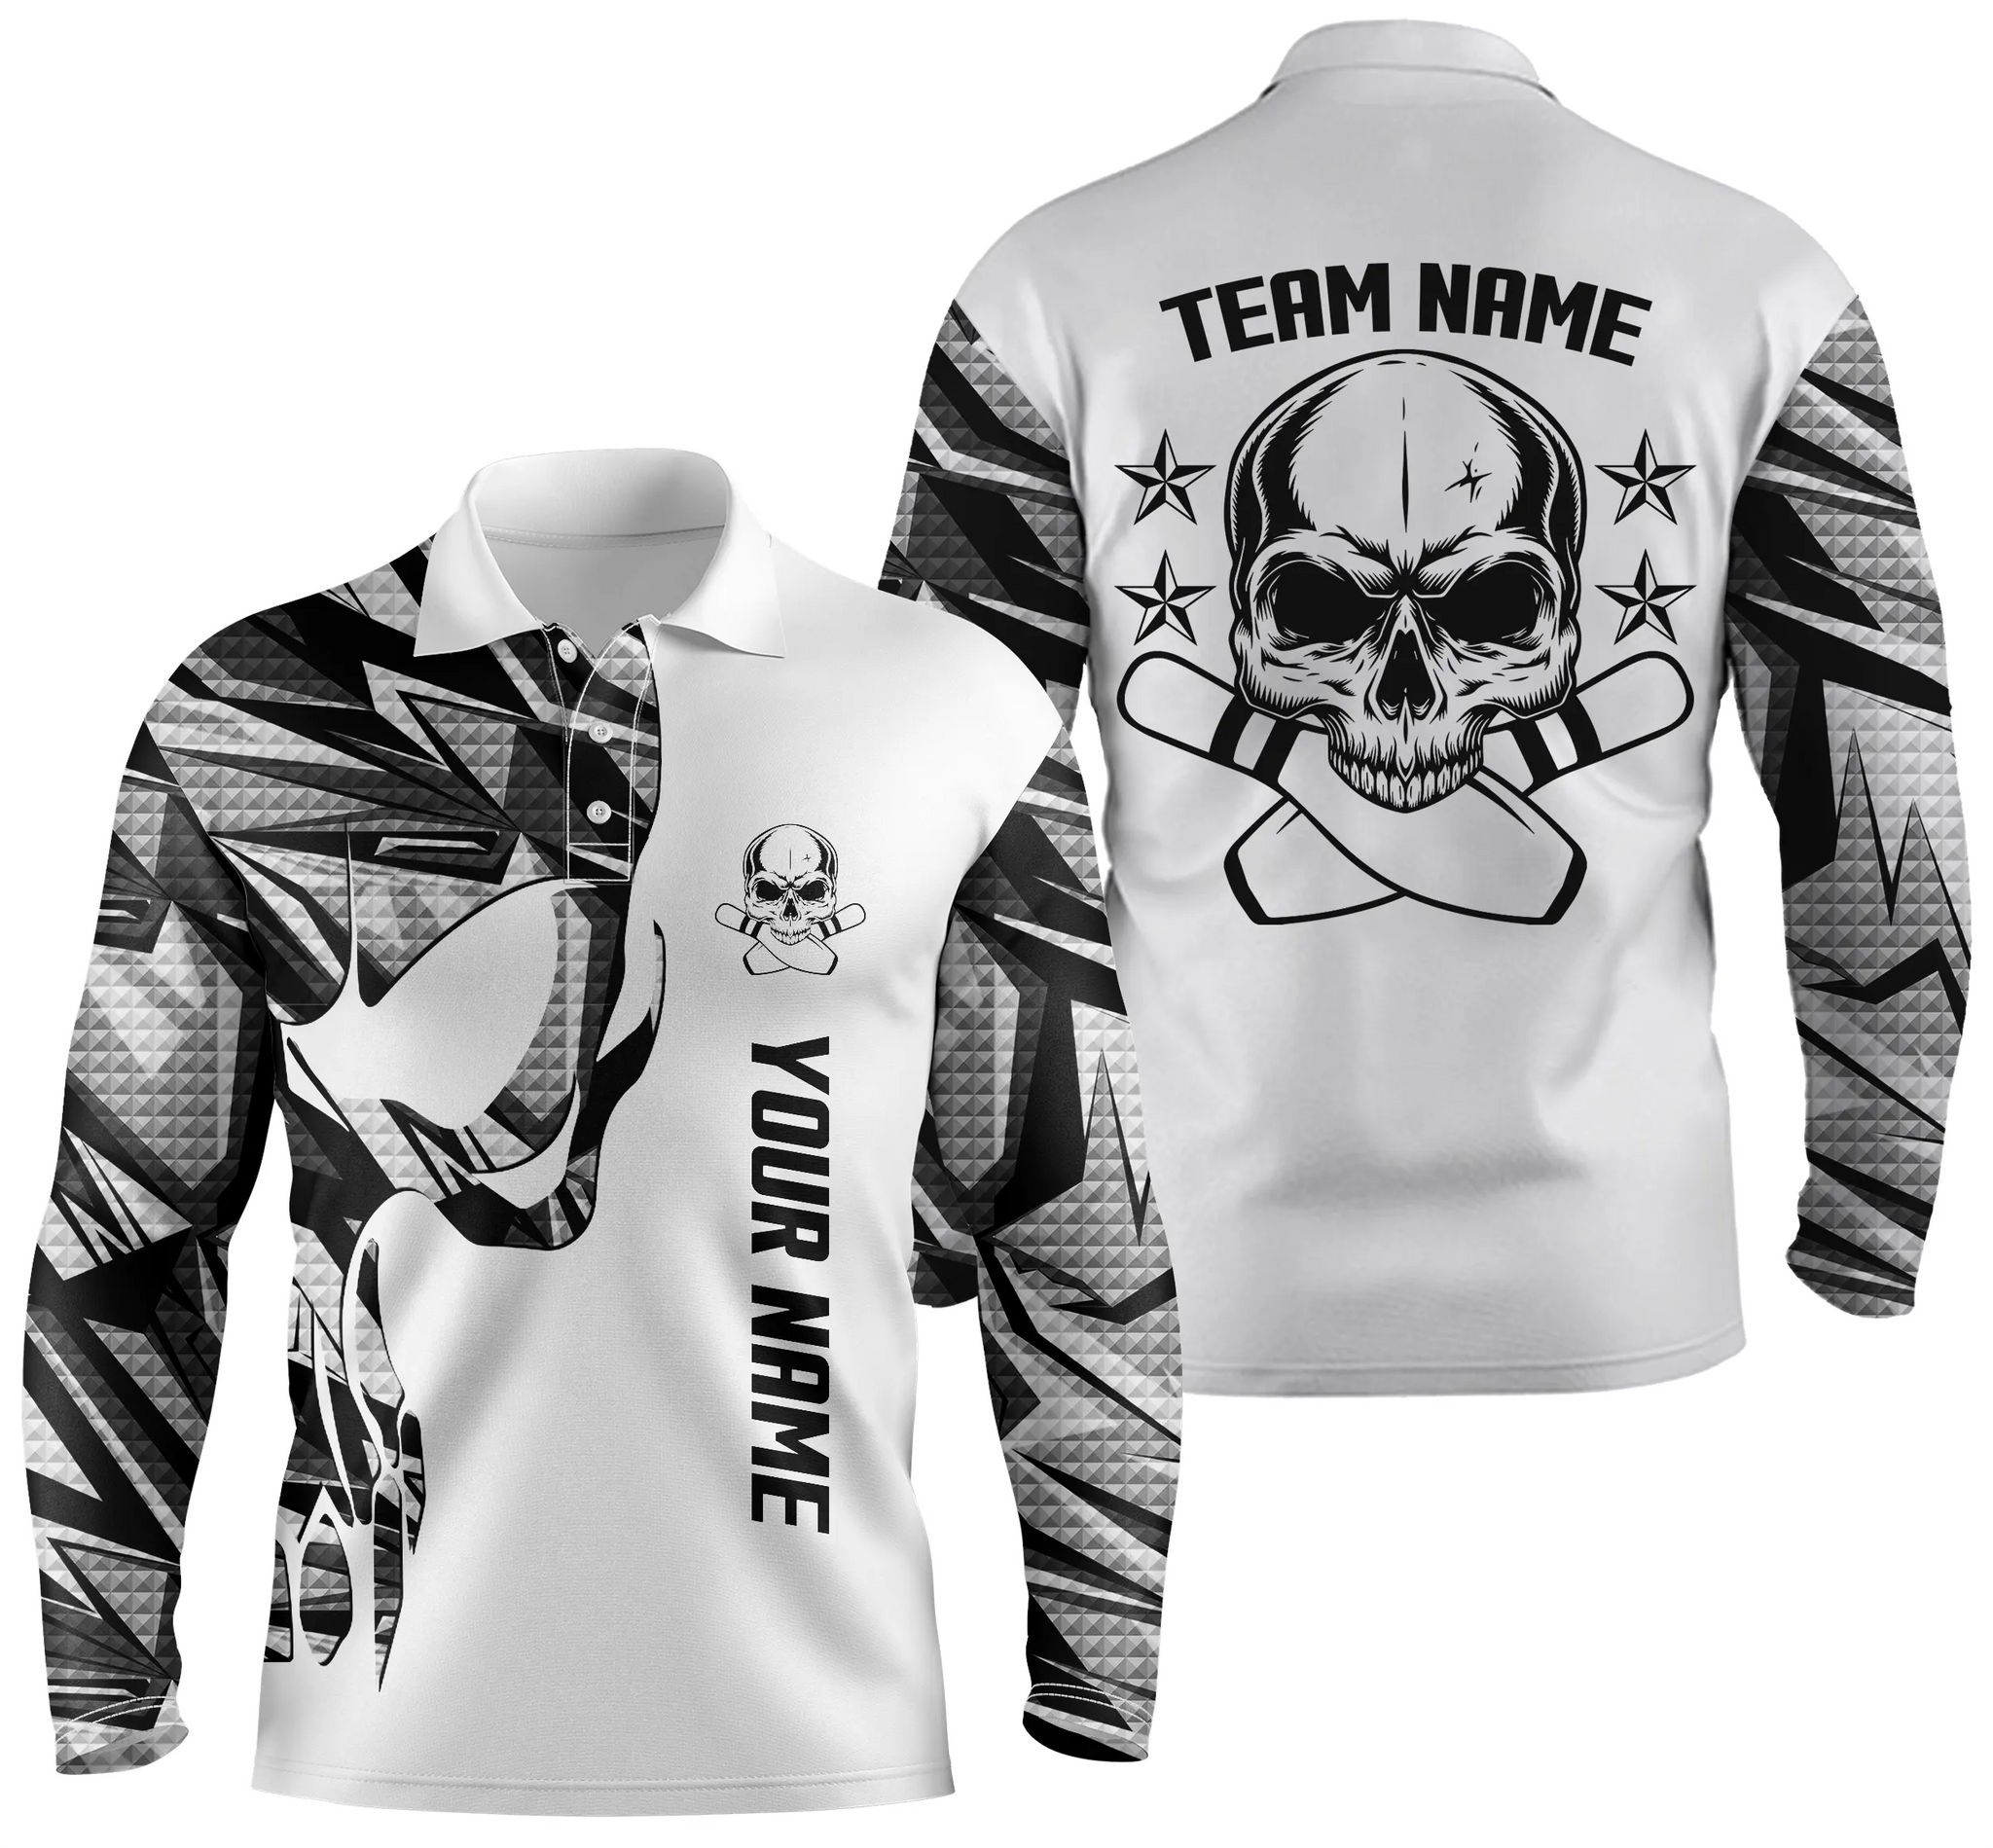 Multi Color Bowling Long Sleeve Polo Shirts For Men Custom Name And Team Name Skull Bowling/ Team Bowling Shirts